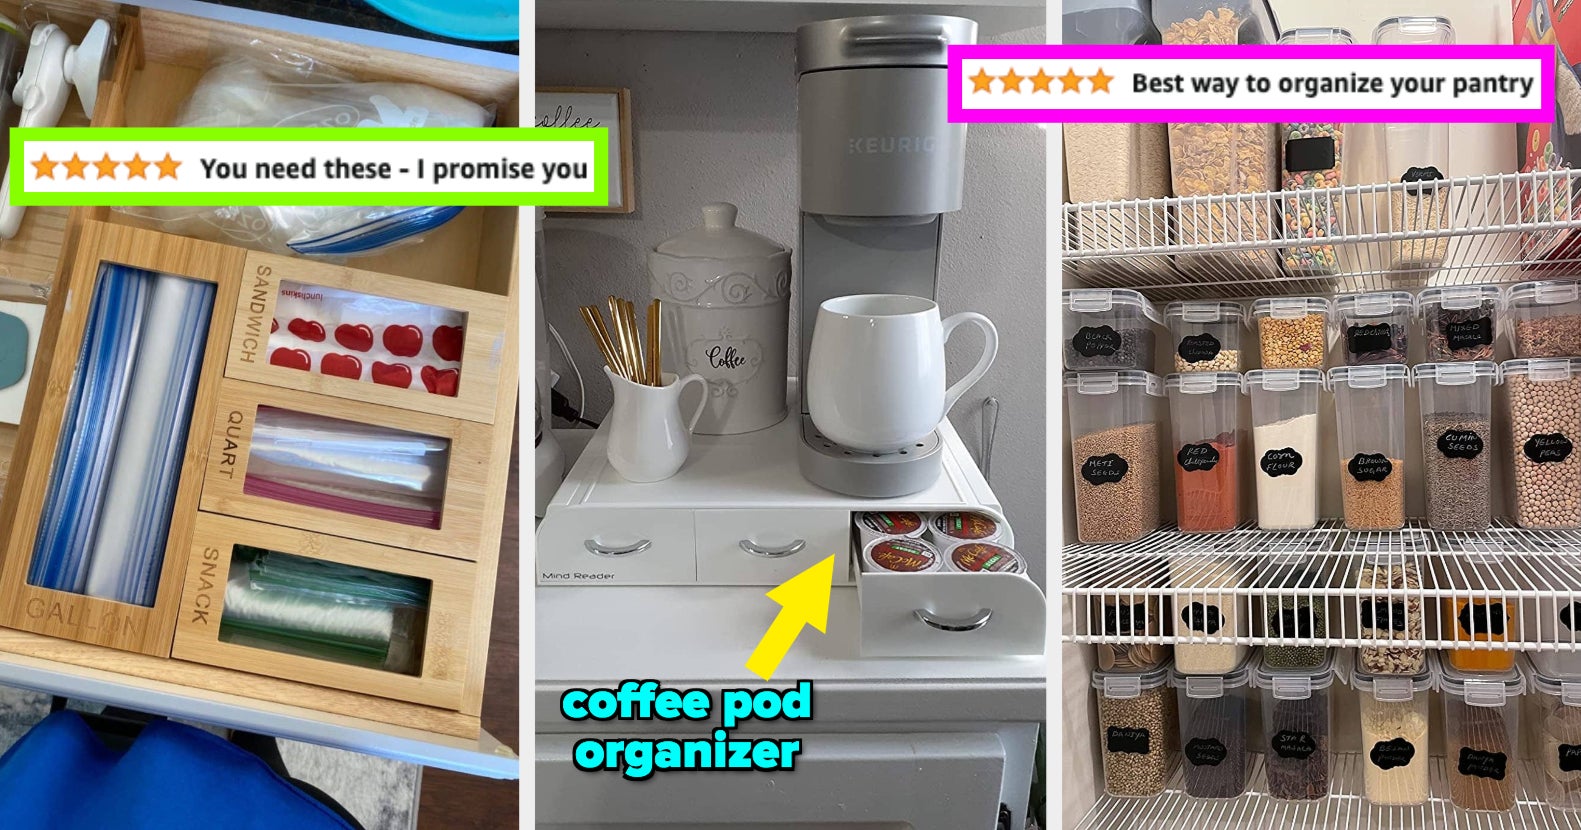 28 Genius Kitchen Organizers That You'll Wish You'd Bought Sooner